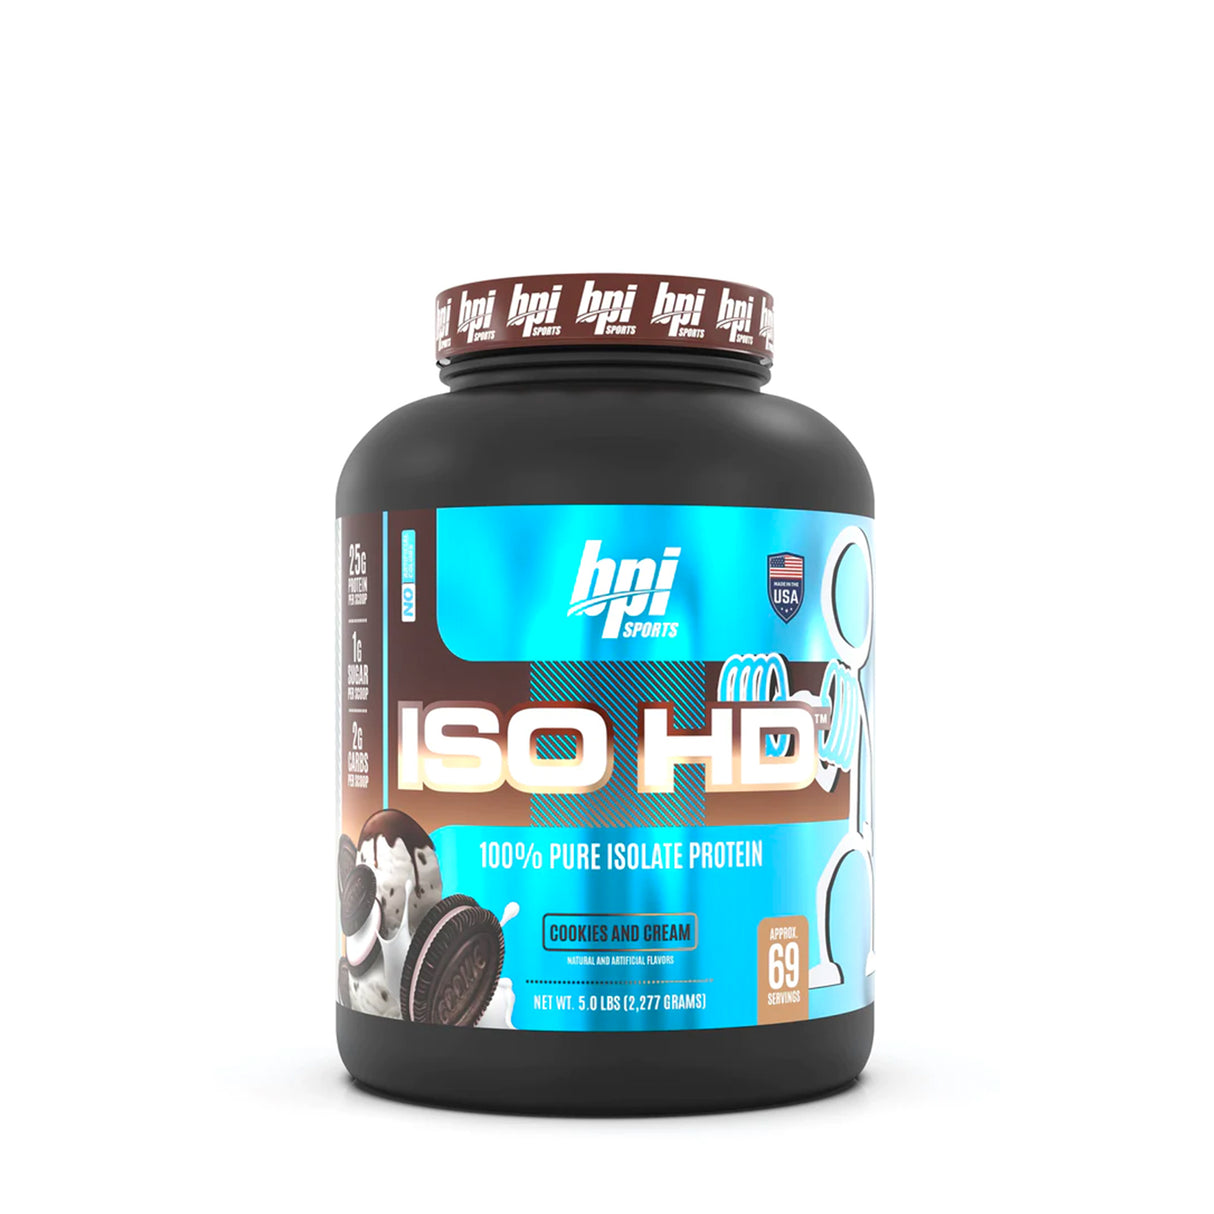    BPI ISO HD - COOKIES AND CREAM FLAVOR | GYM SUPPLEMENTS U.S 